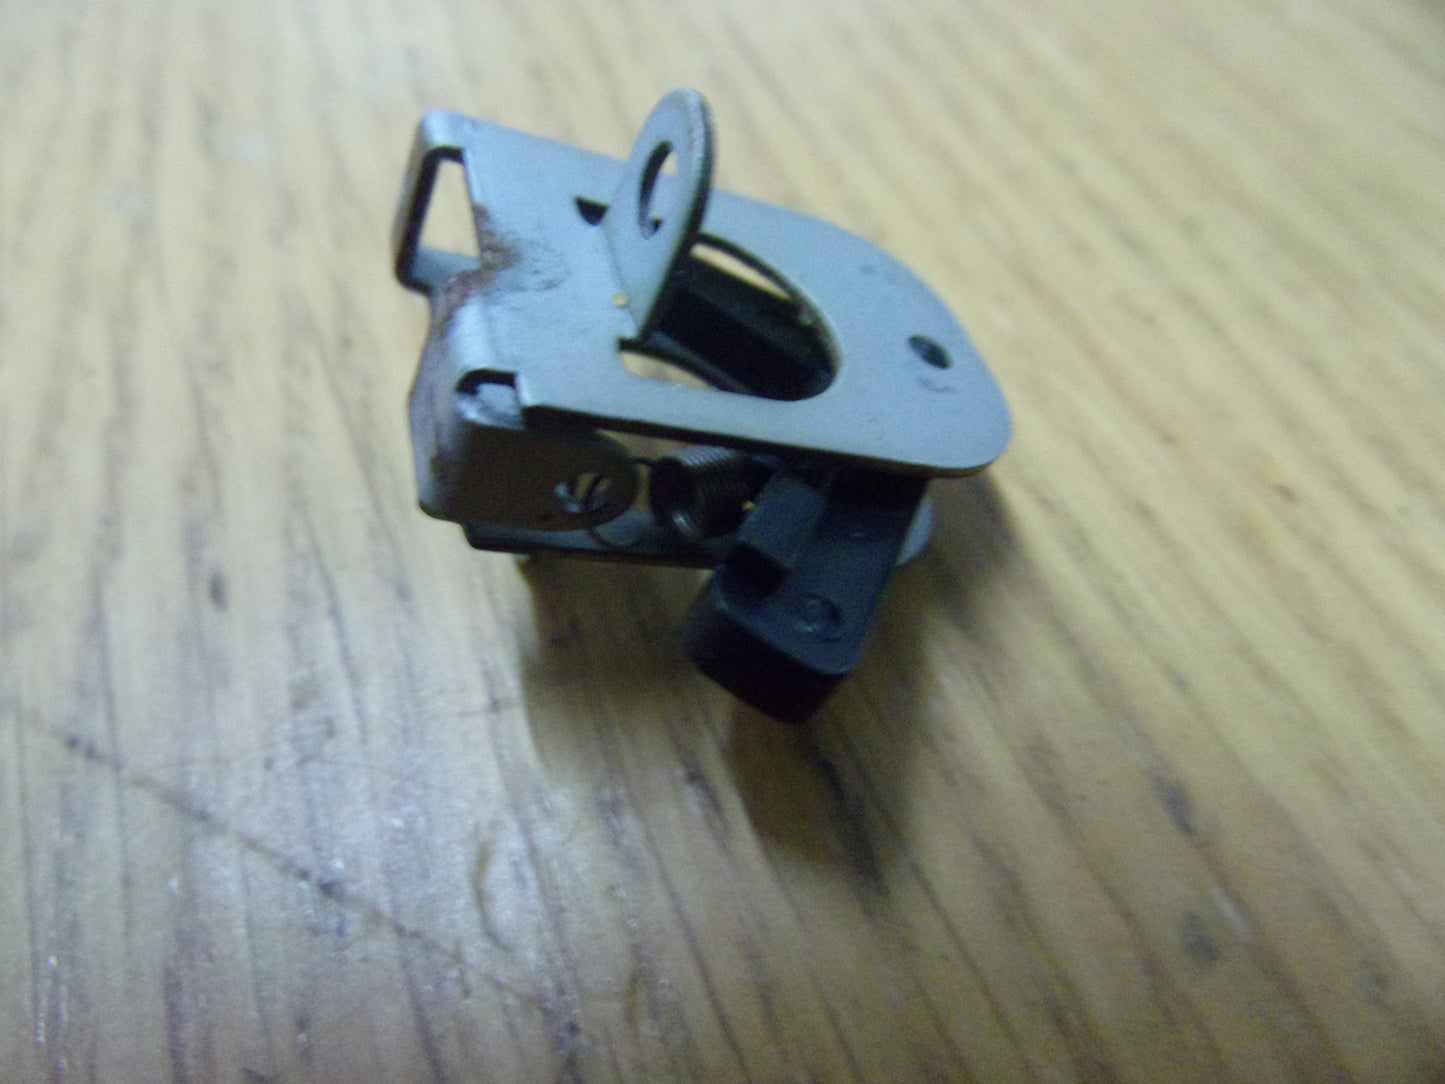 Tascam 246 door assembly catch